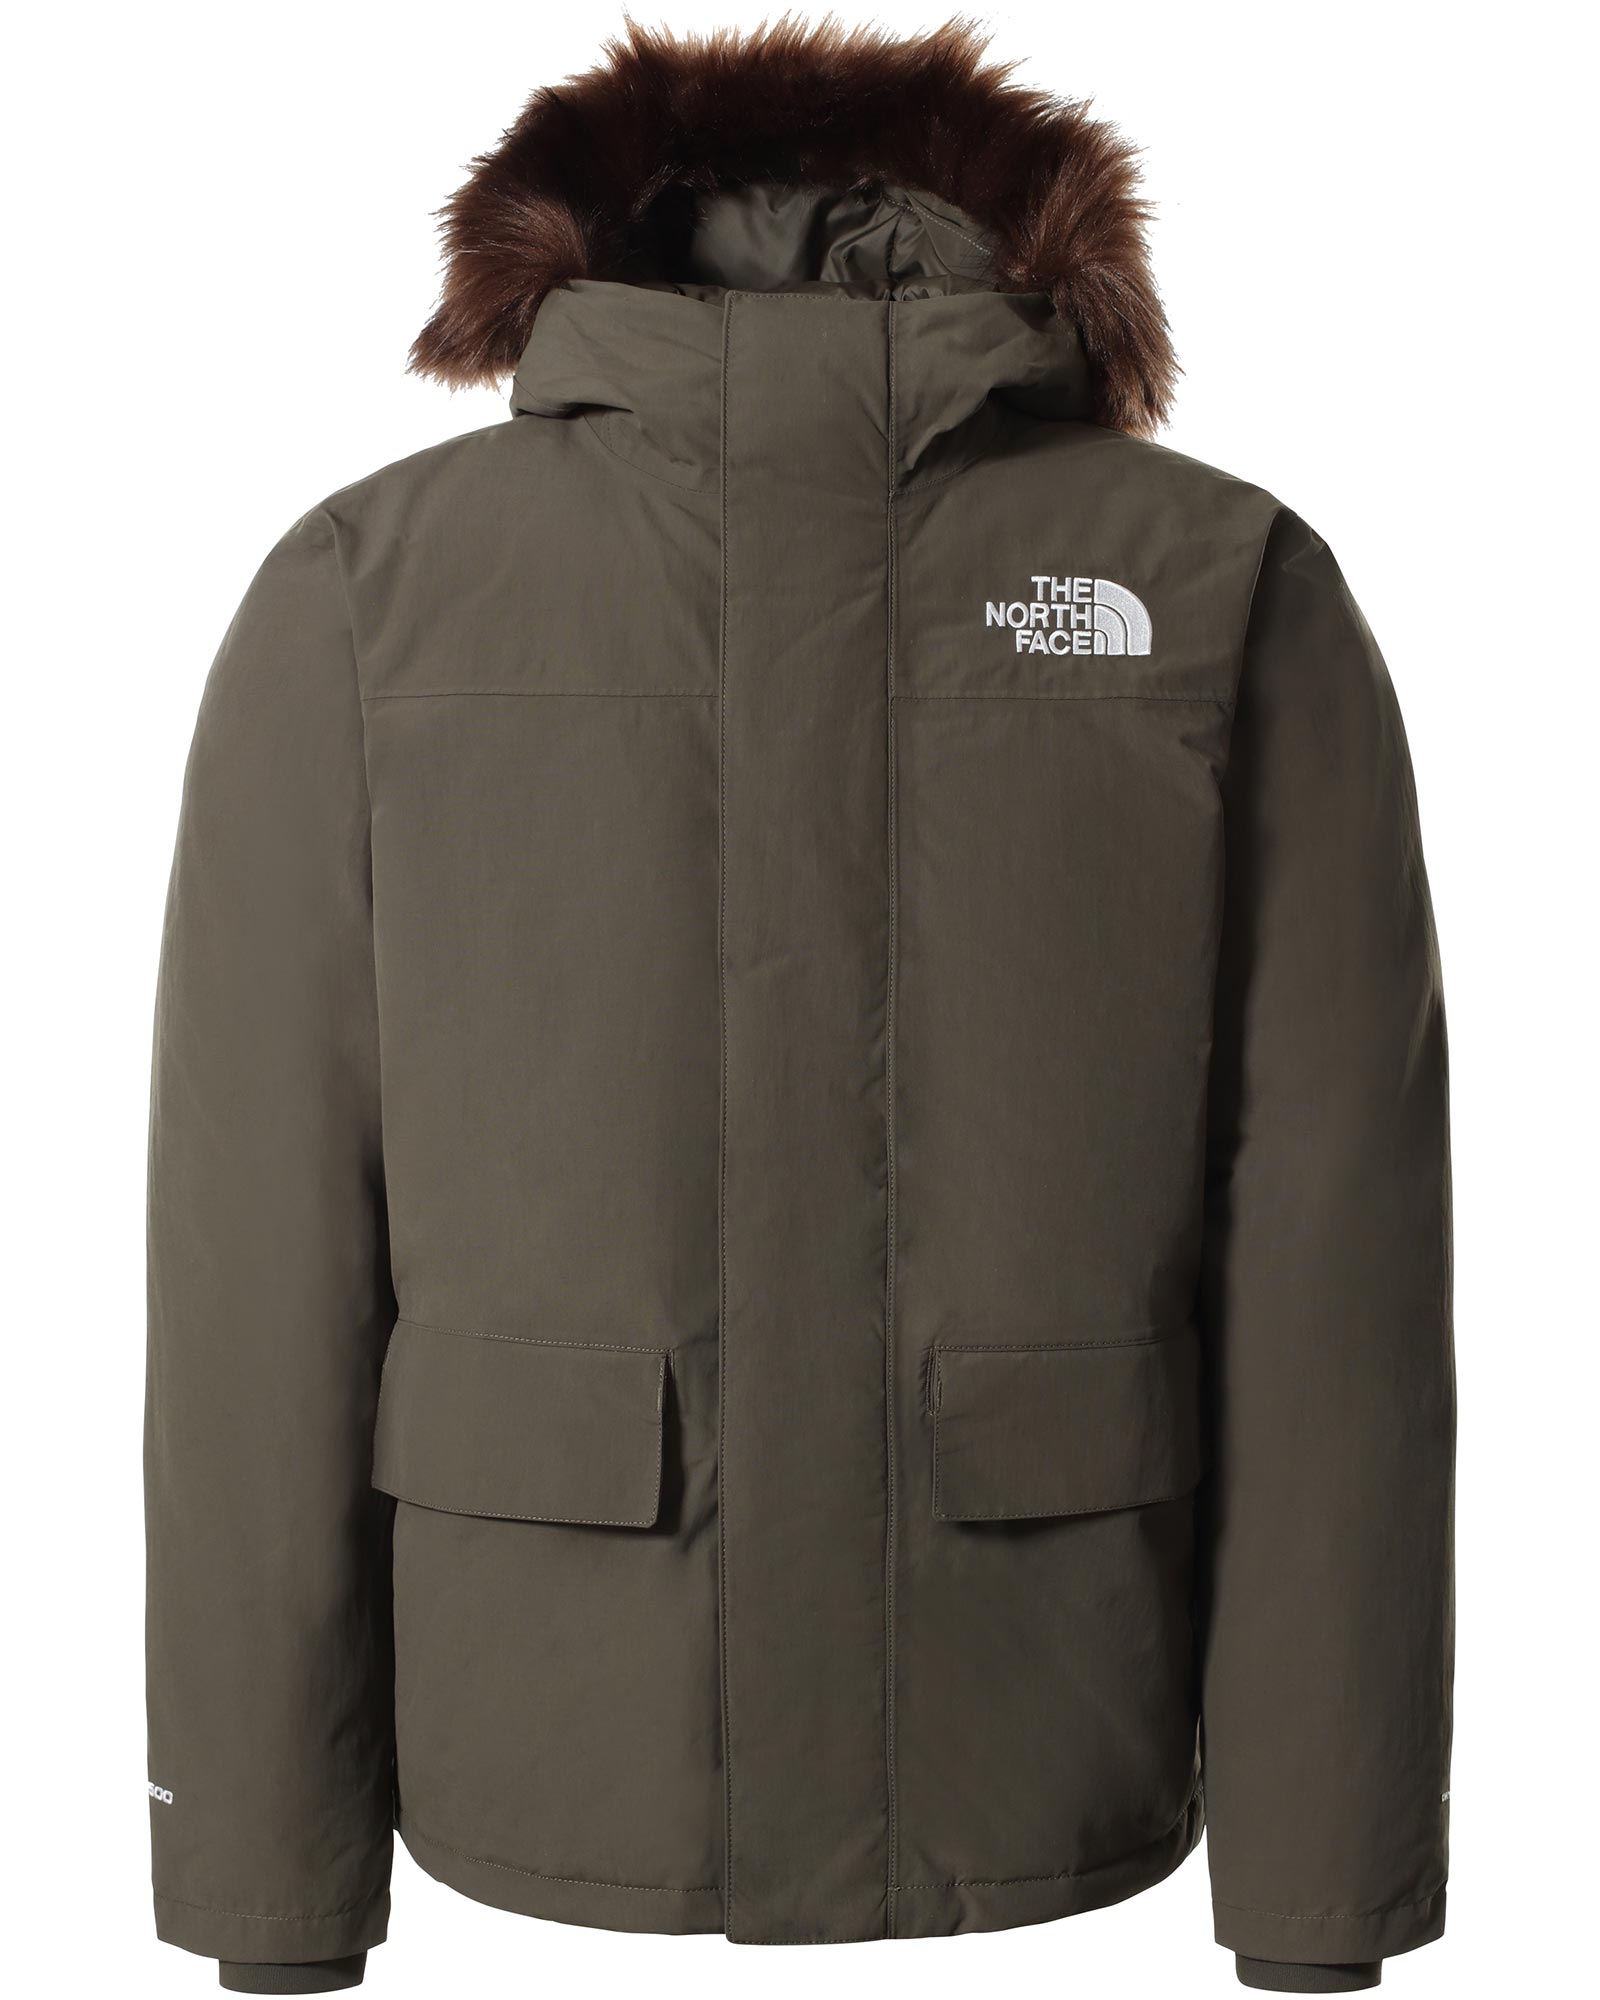 The North Face Arctic Men’s Parka Jacket - New Taupe Green S